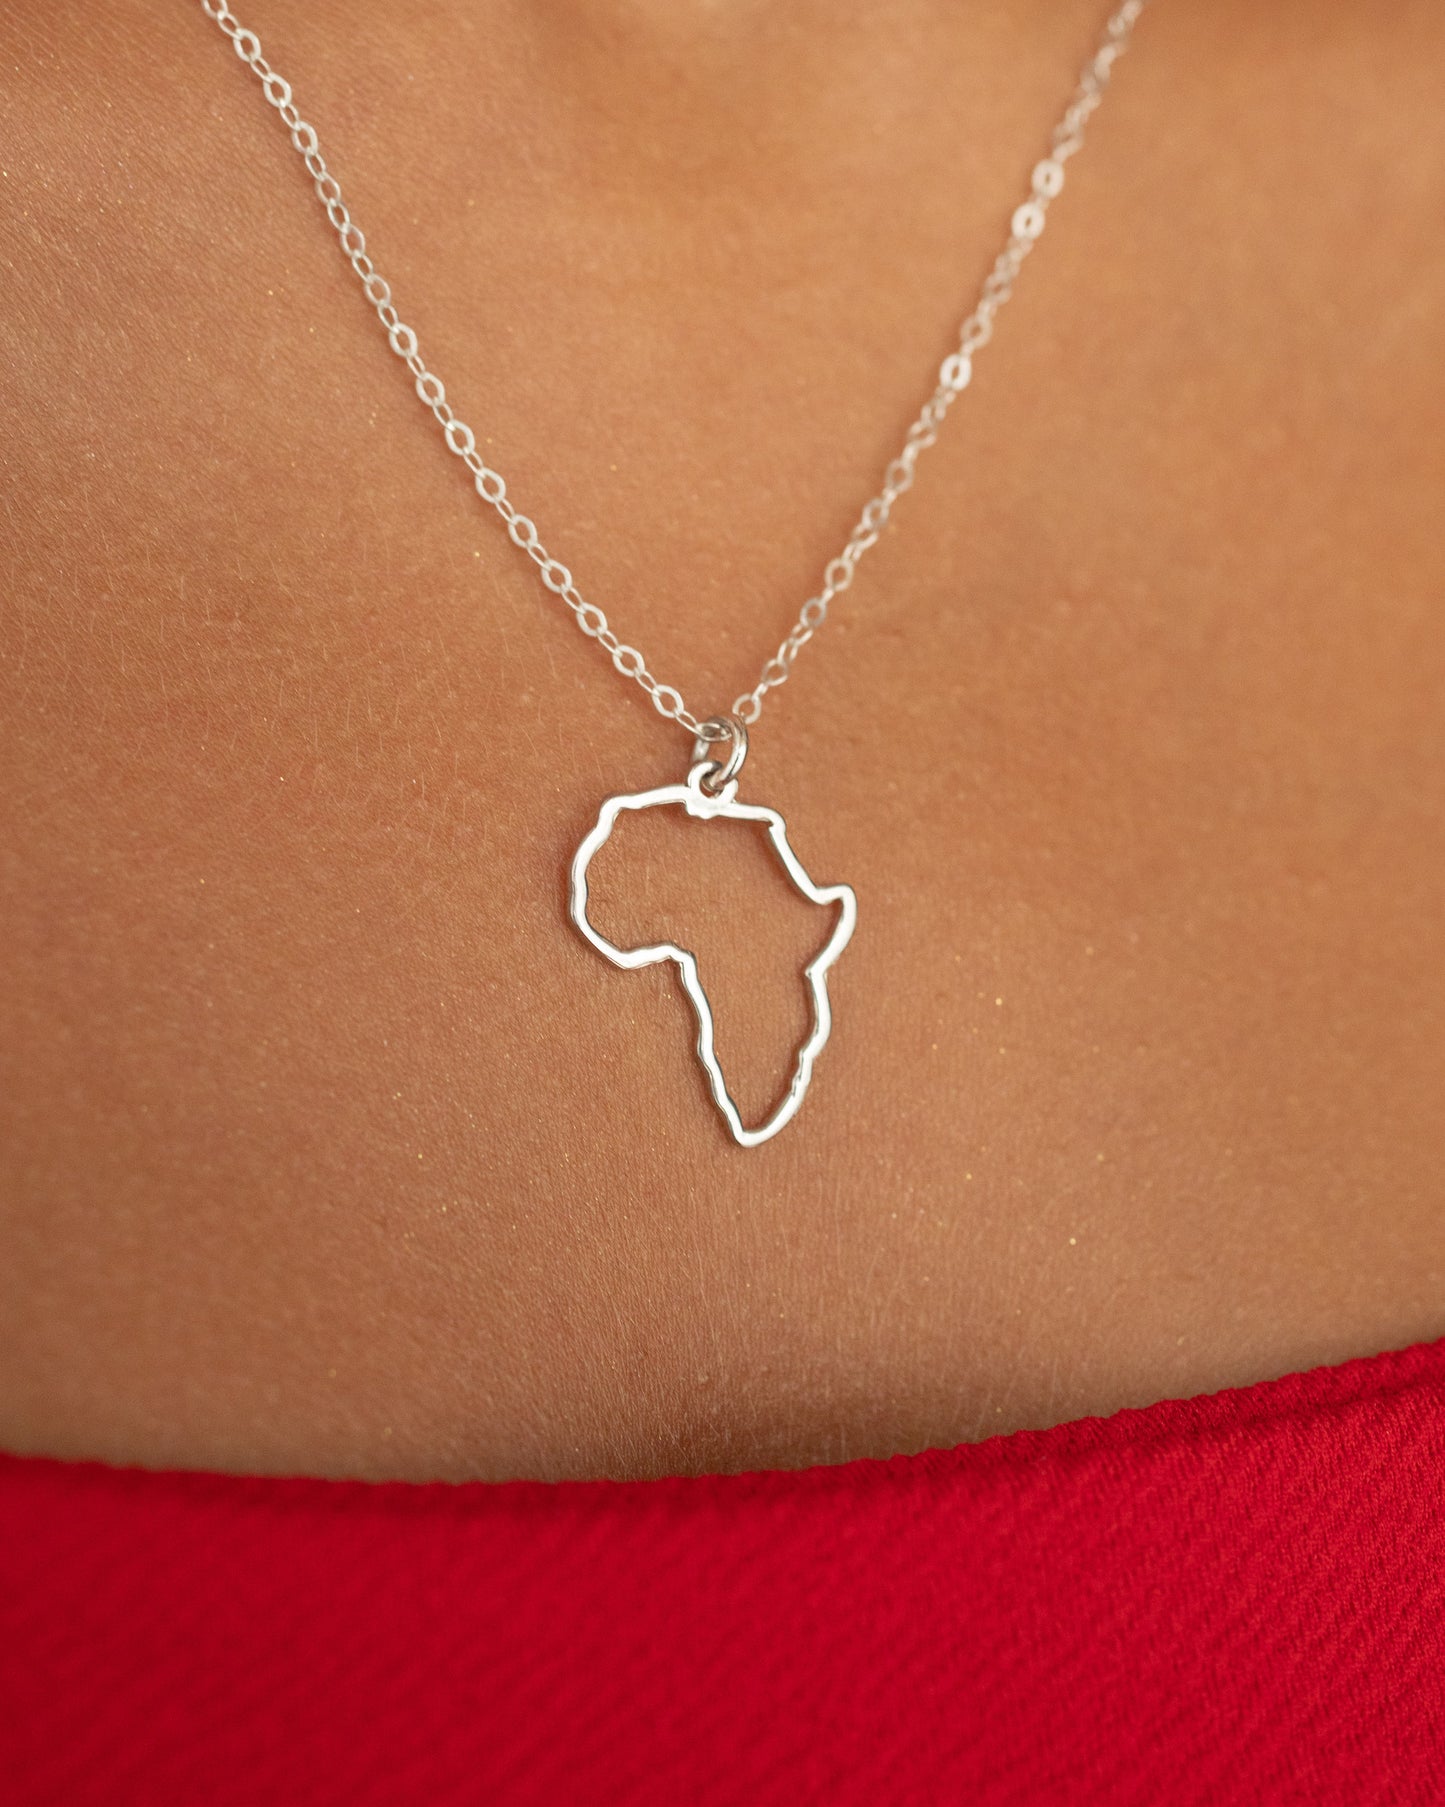 Africa Continent Necklace